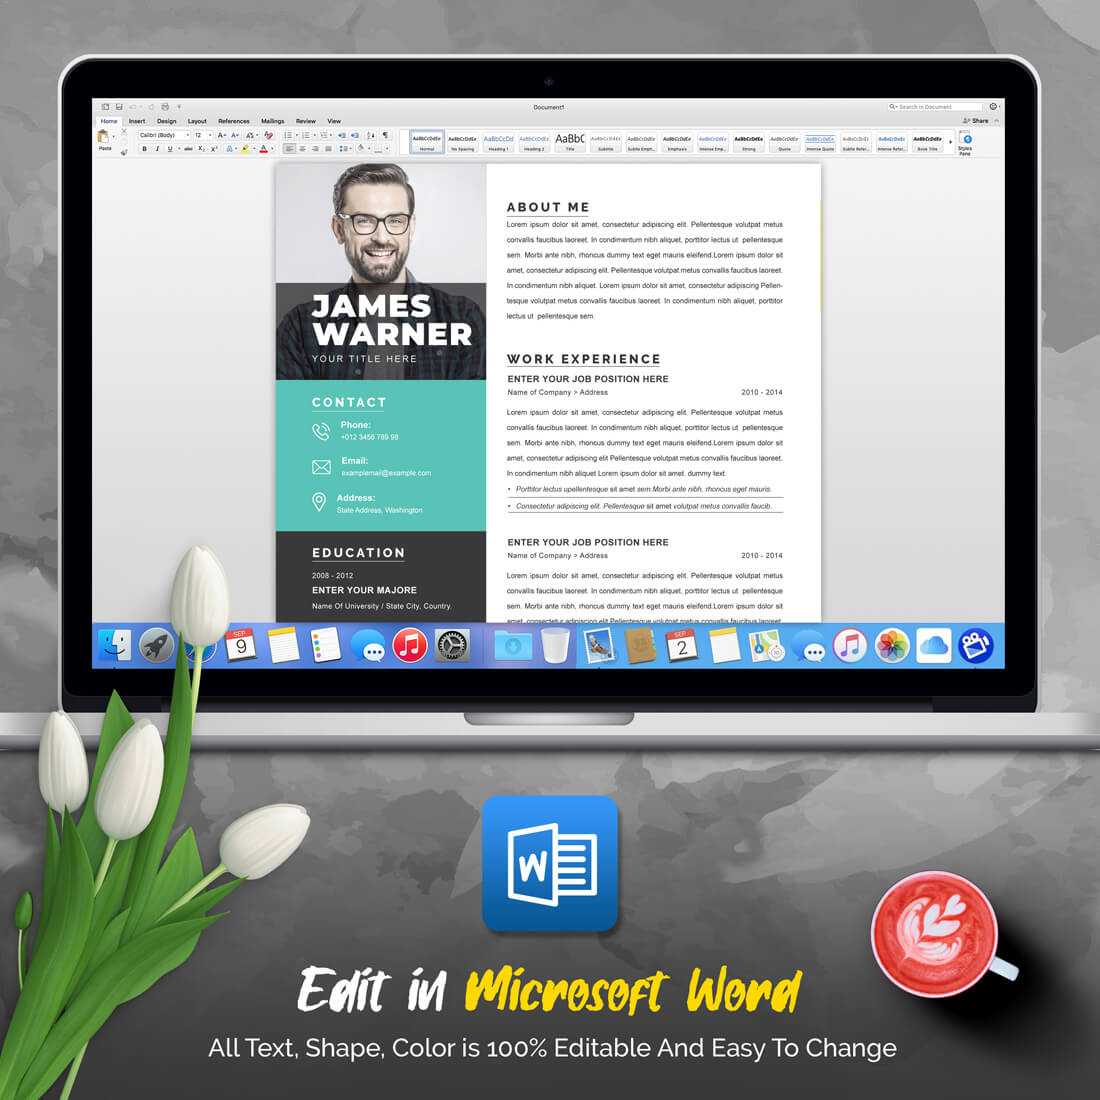 04 3 pages professional ms word aple pages eps photoshop psd resume cv design template design by resume inventor 839